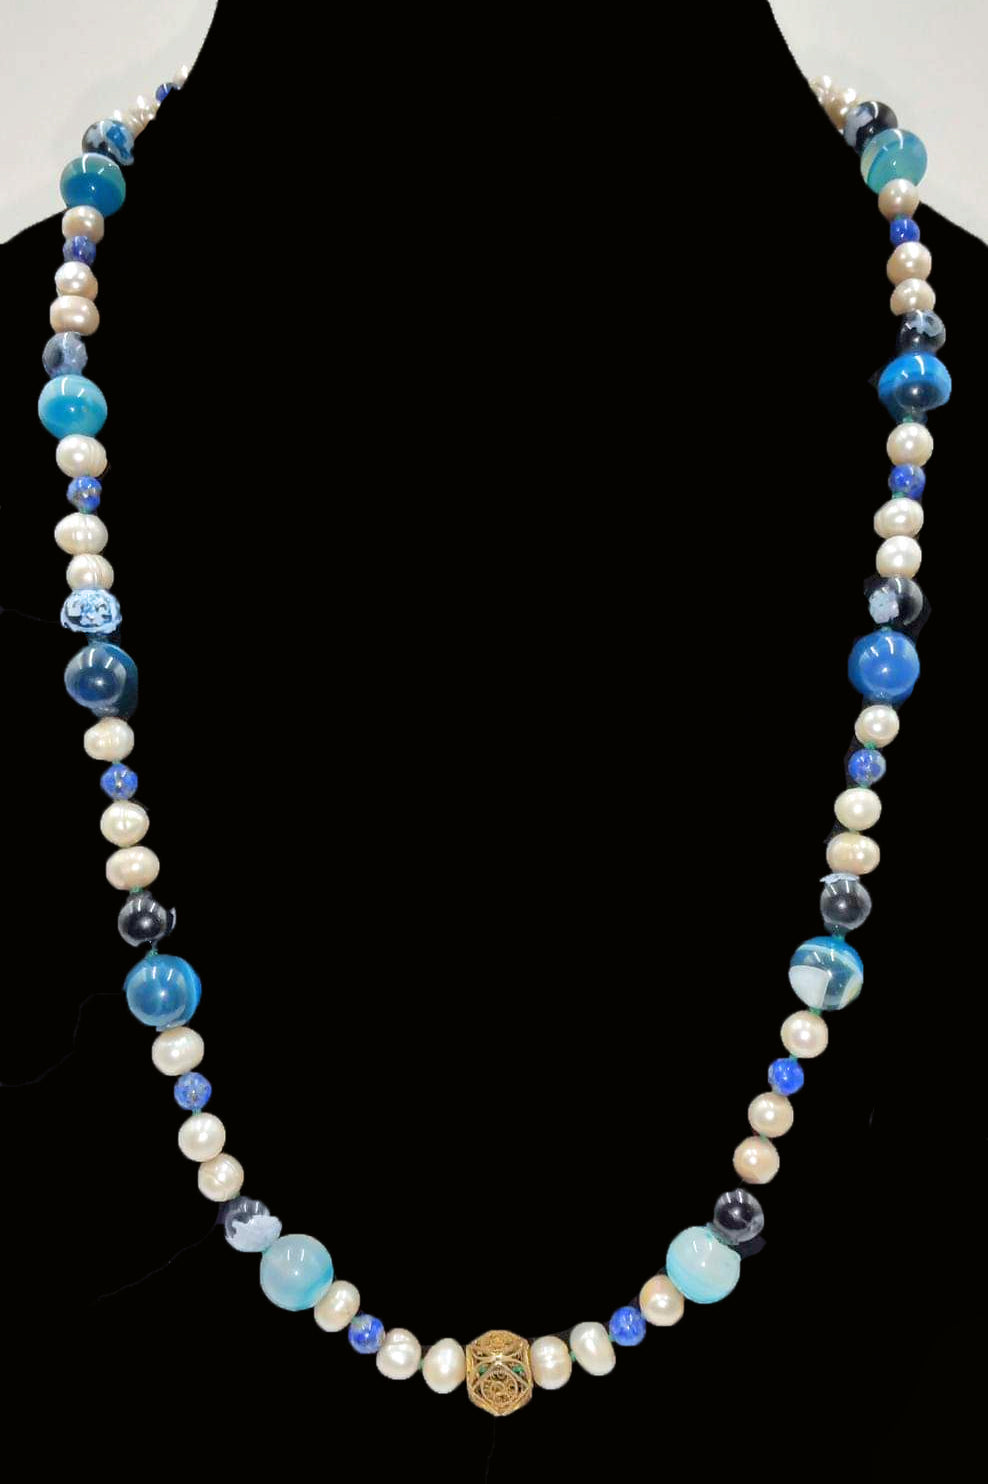 Pearls, blue agate, lapis lazuli, silk, antique sterling silver necklace.